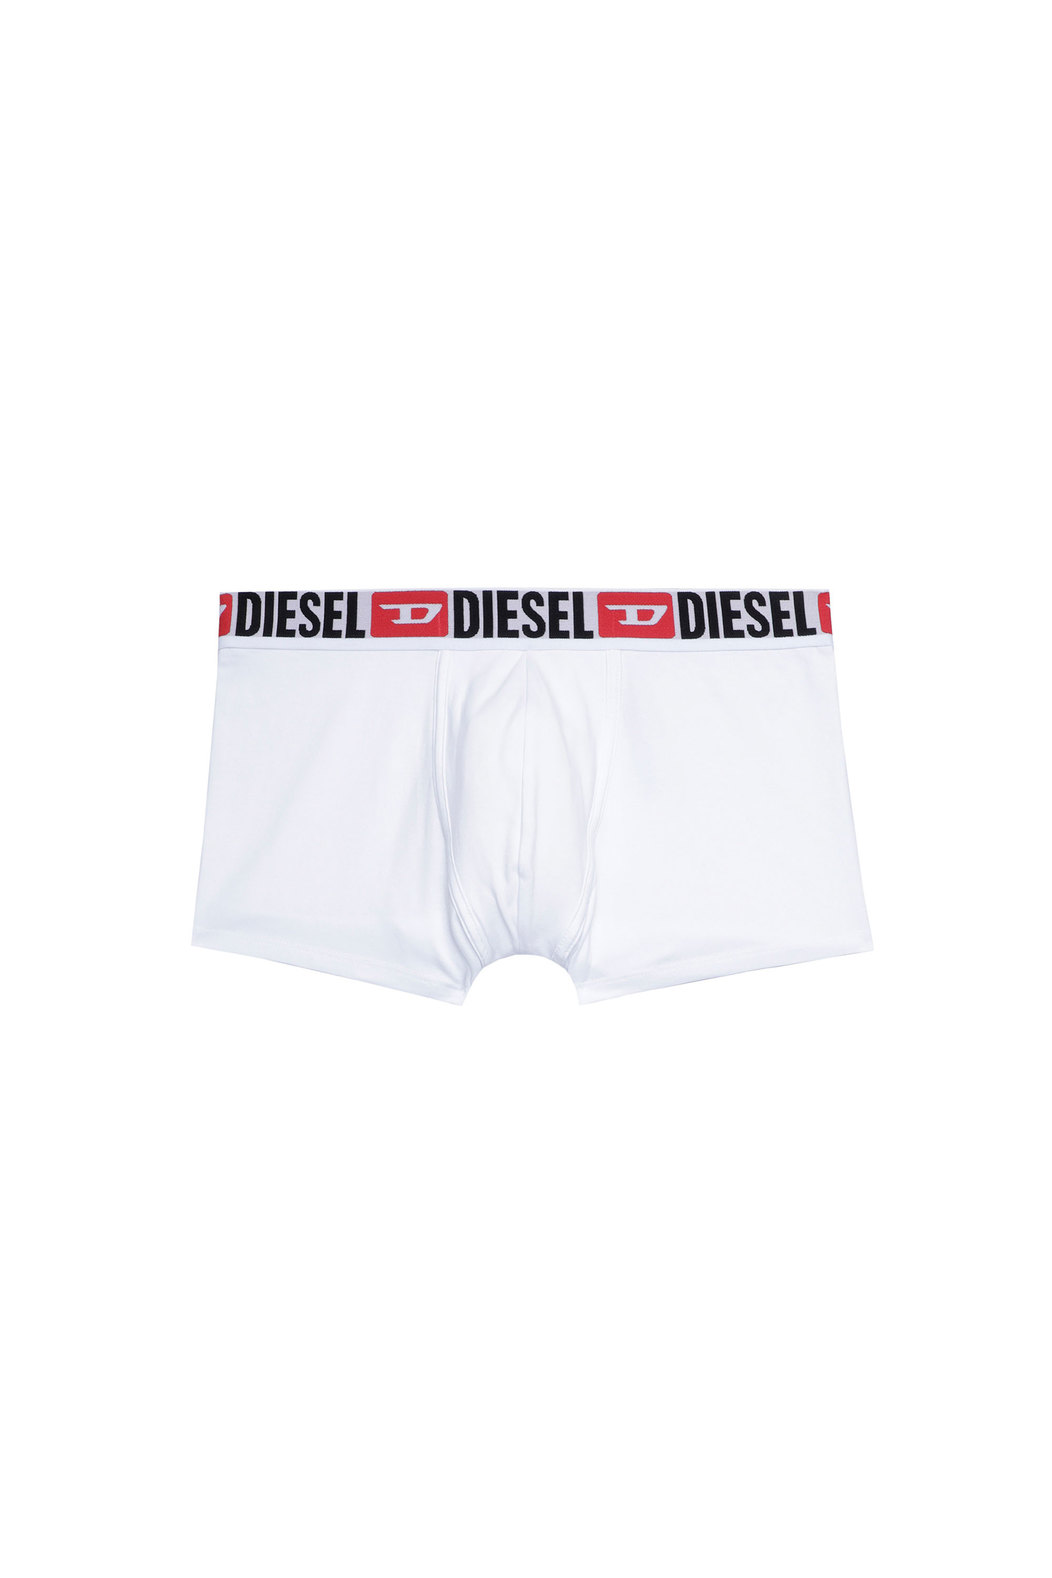 Tall-Over Logo Waist Boxers - 3 Pack